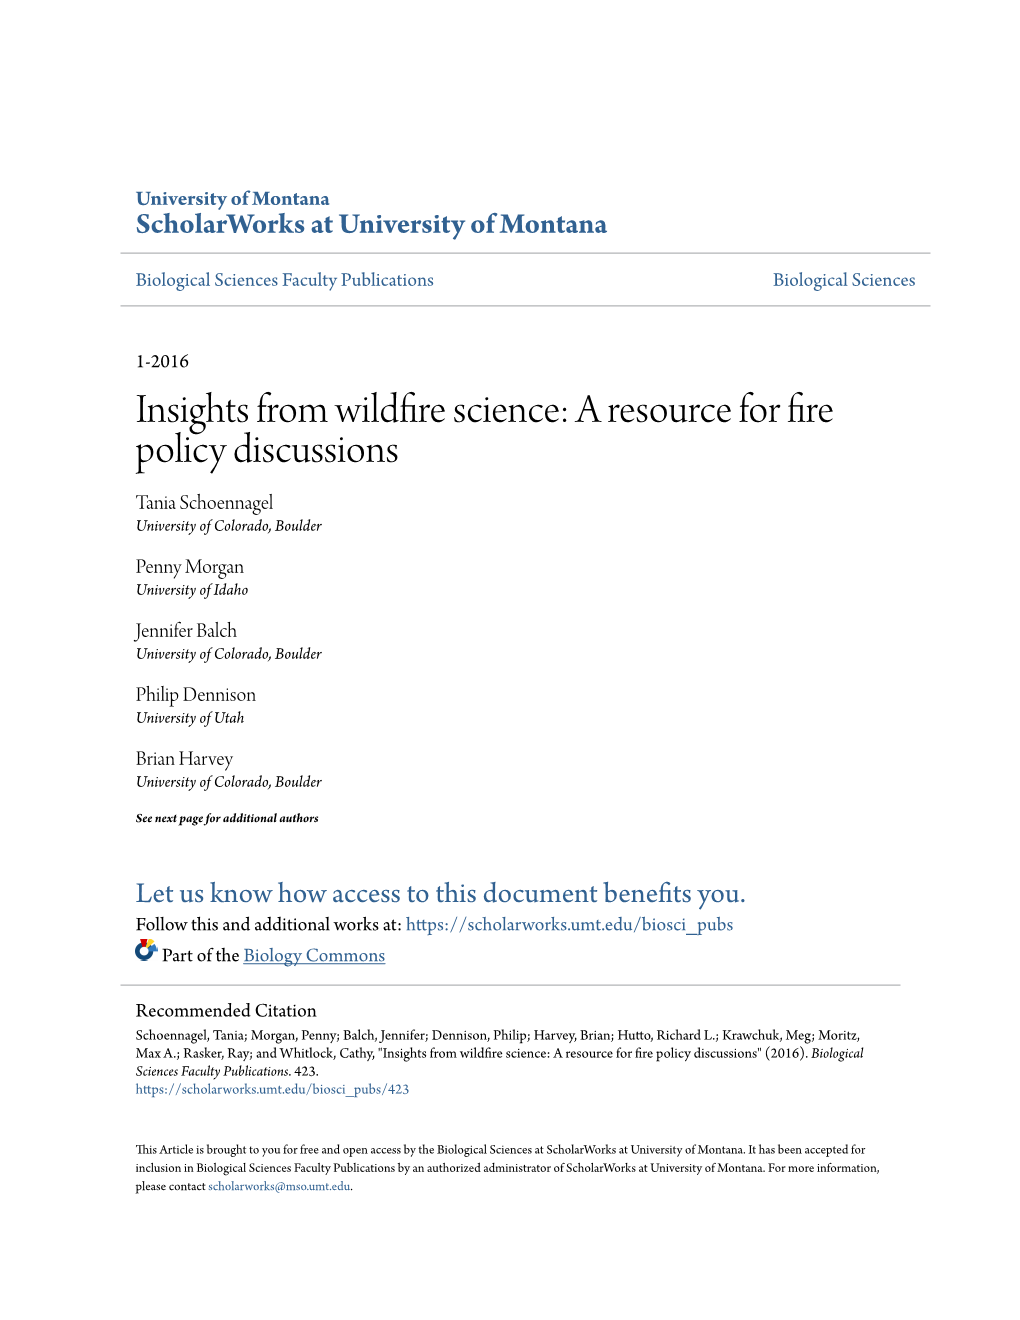 Insights from Wildfire Science: a Resource for Fire Policy Discussions Tania Schoennagel University of Colorado, Boulder